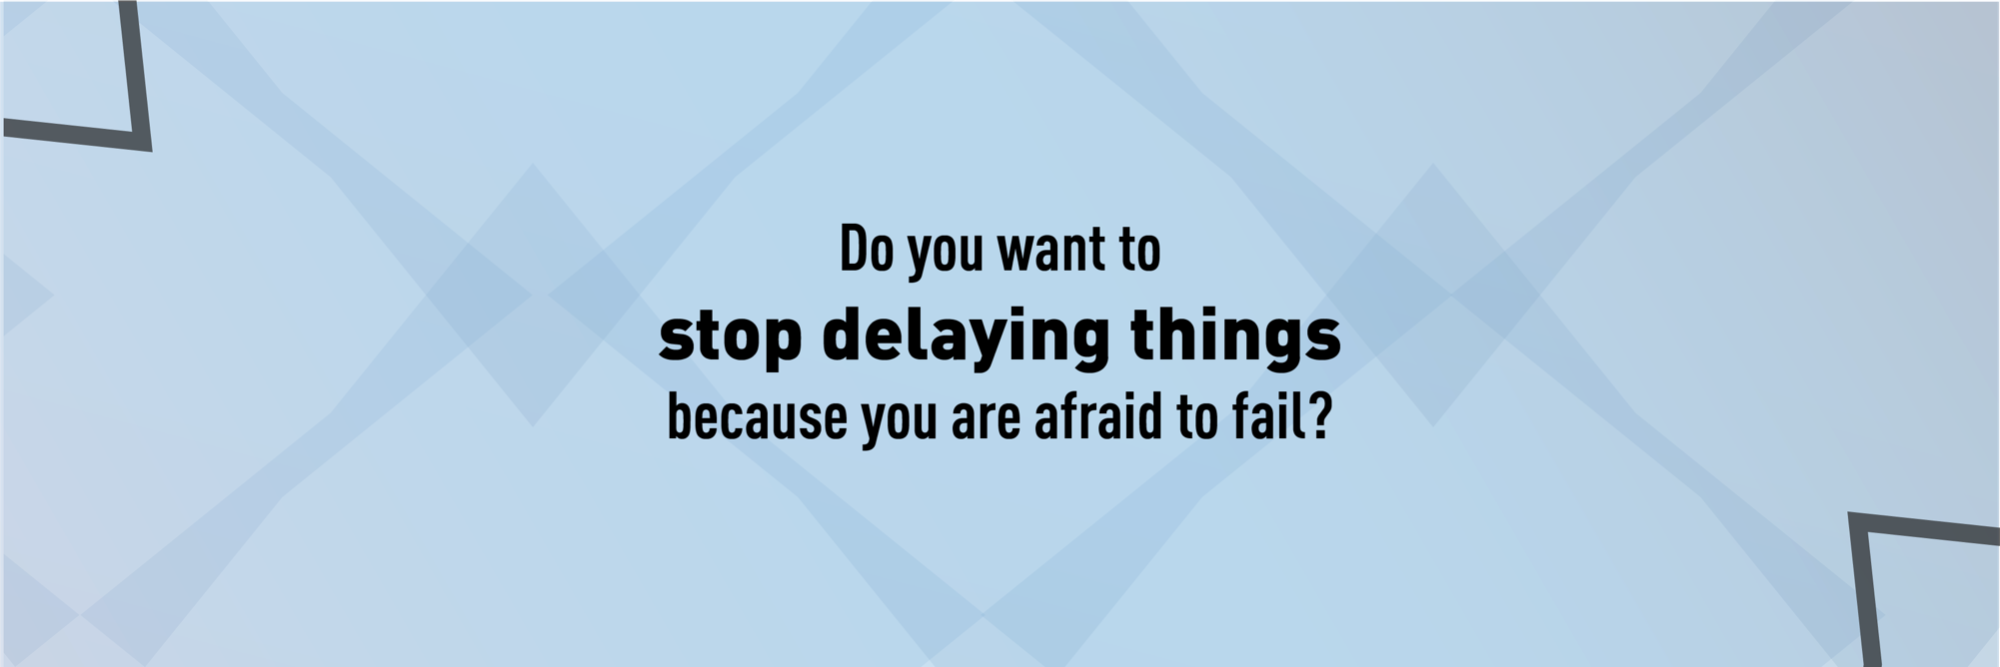 Do you want to stodelaying things because you are afraid to fail?